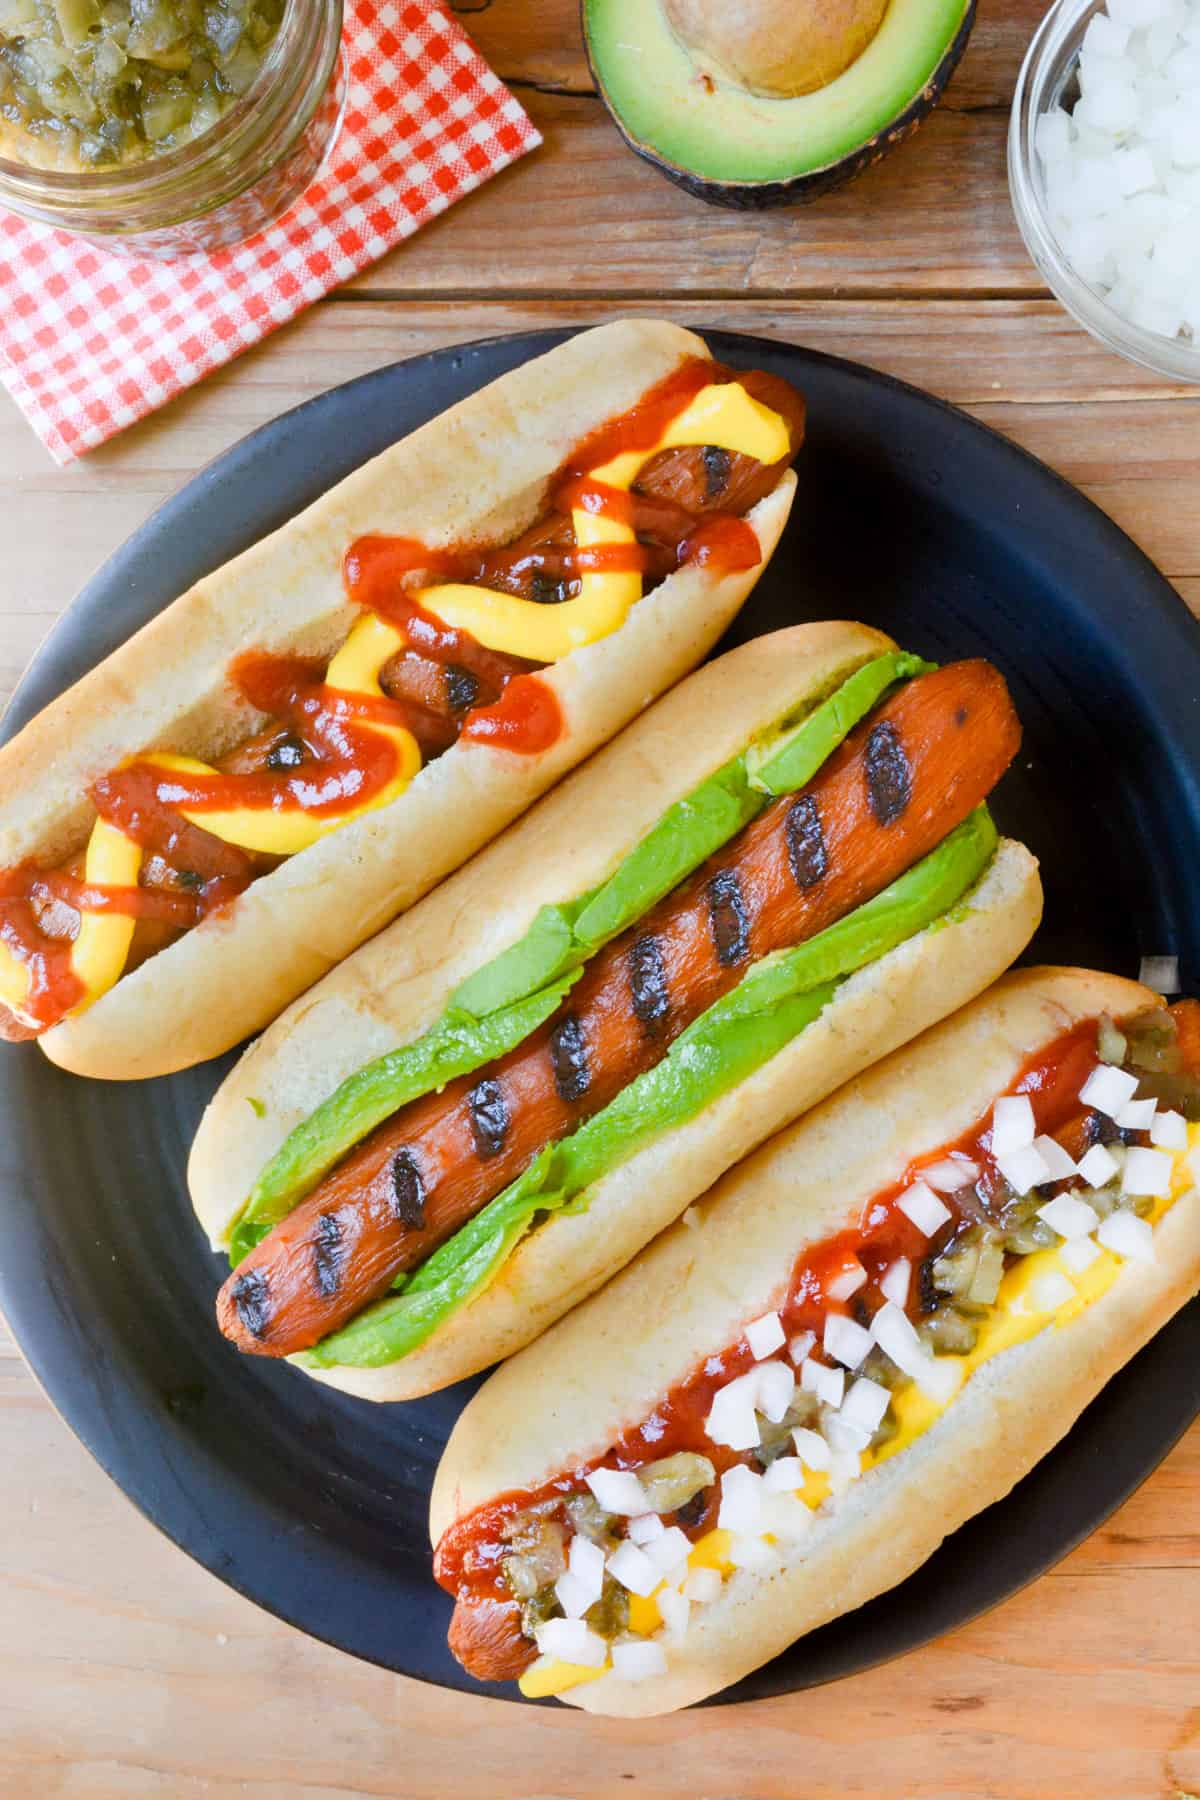 Three carrot dogs with toppings on a black plate.